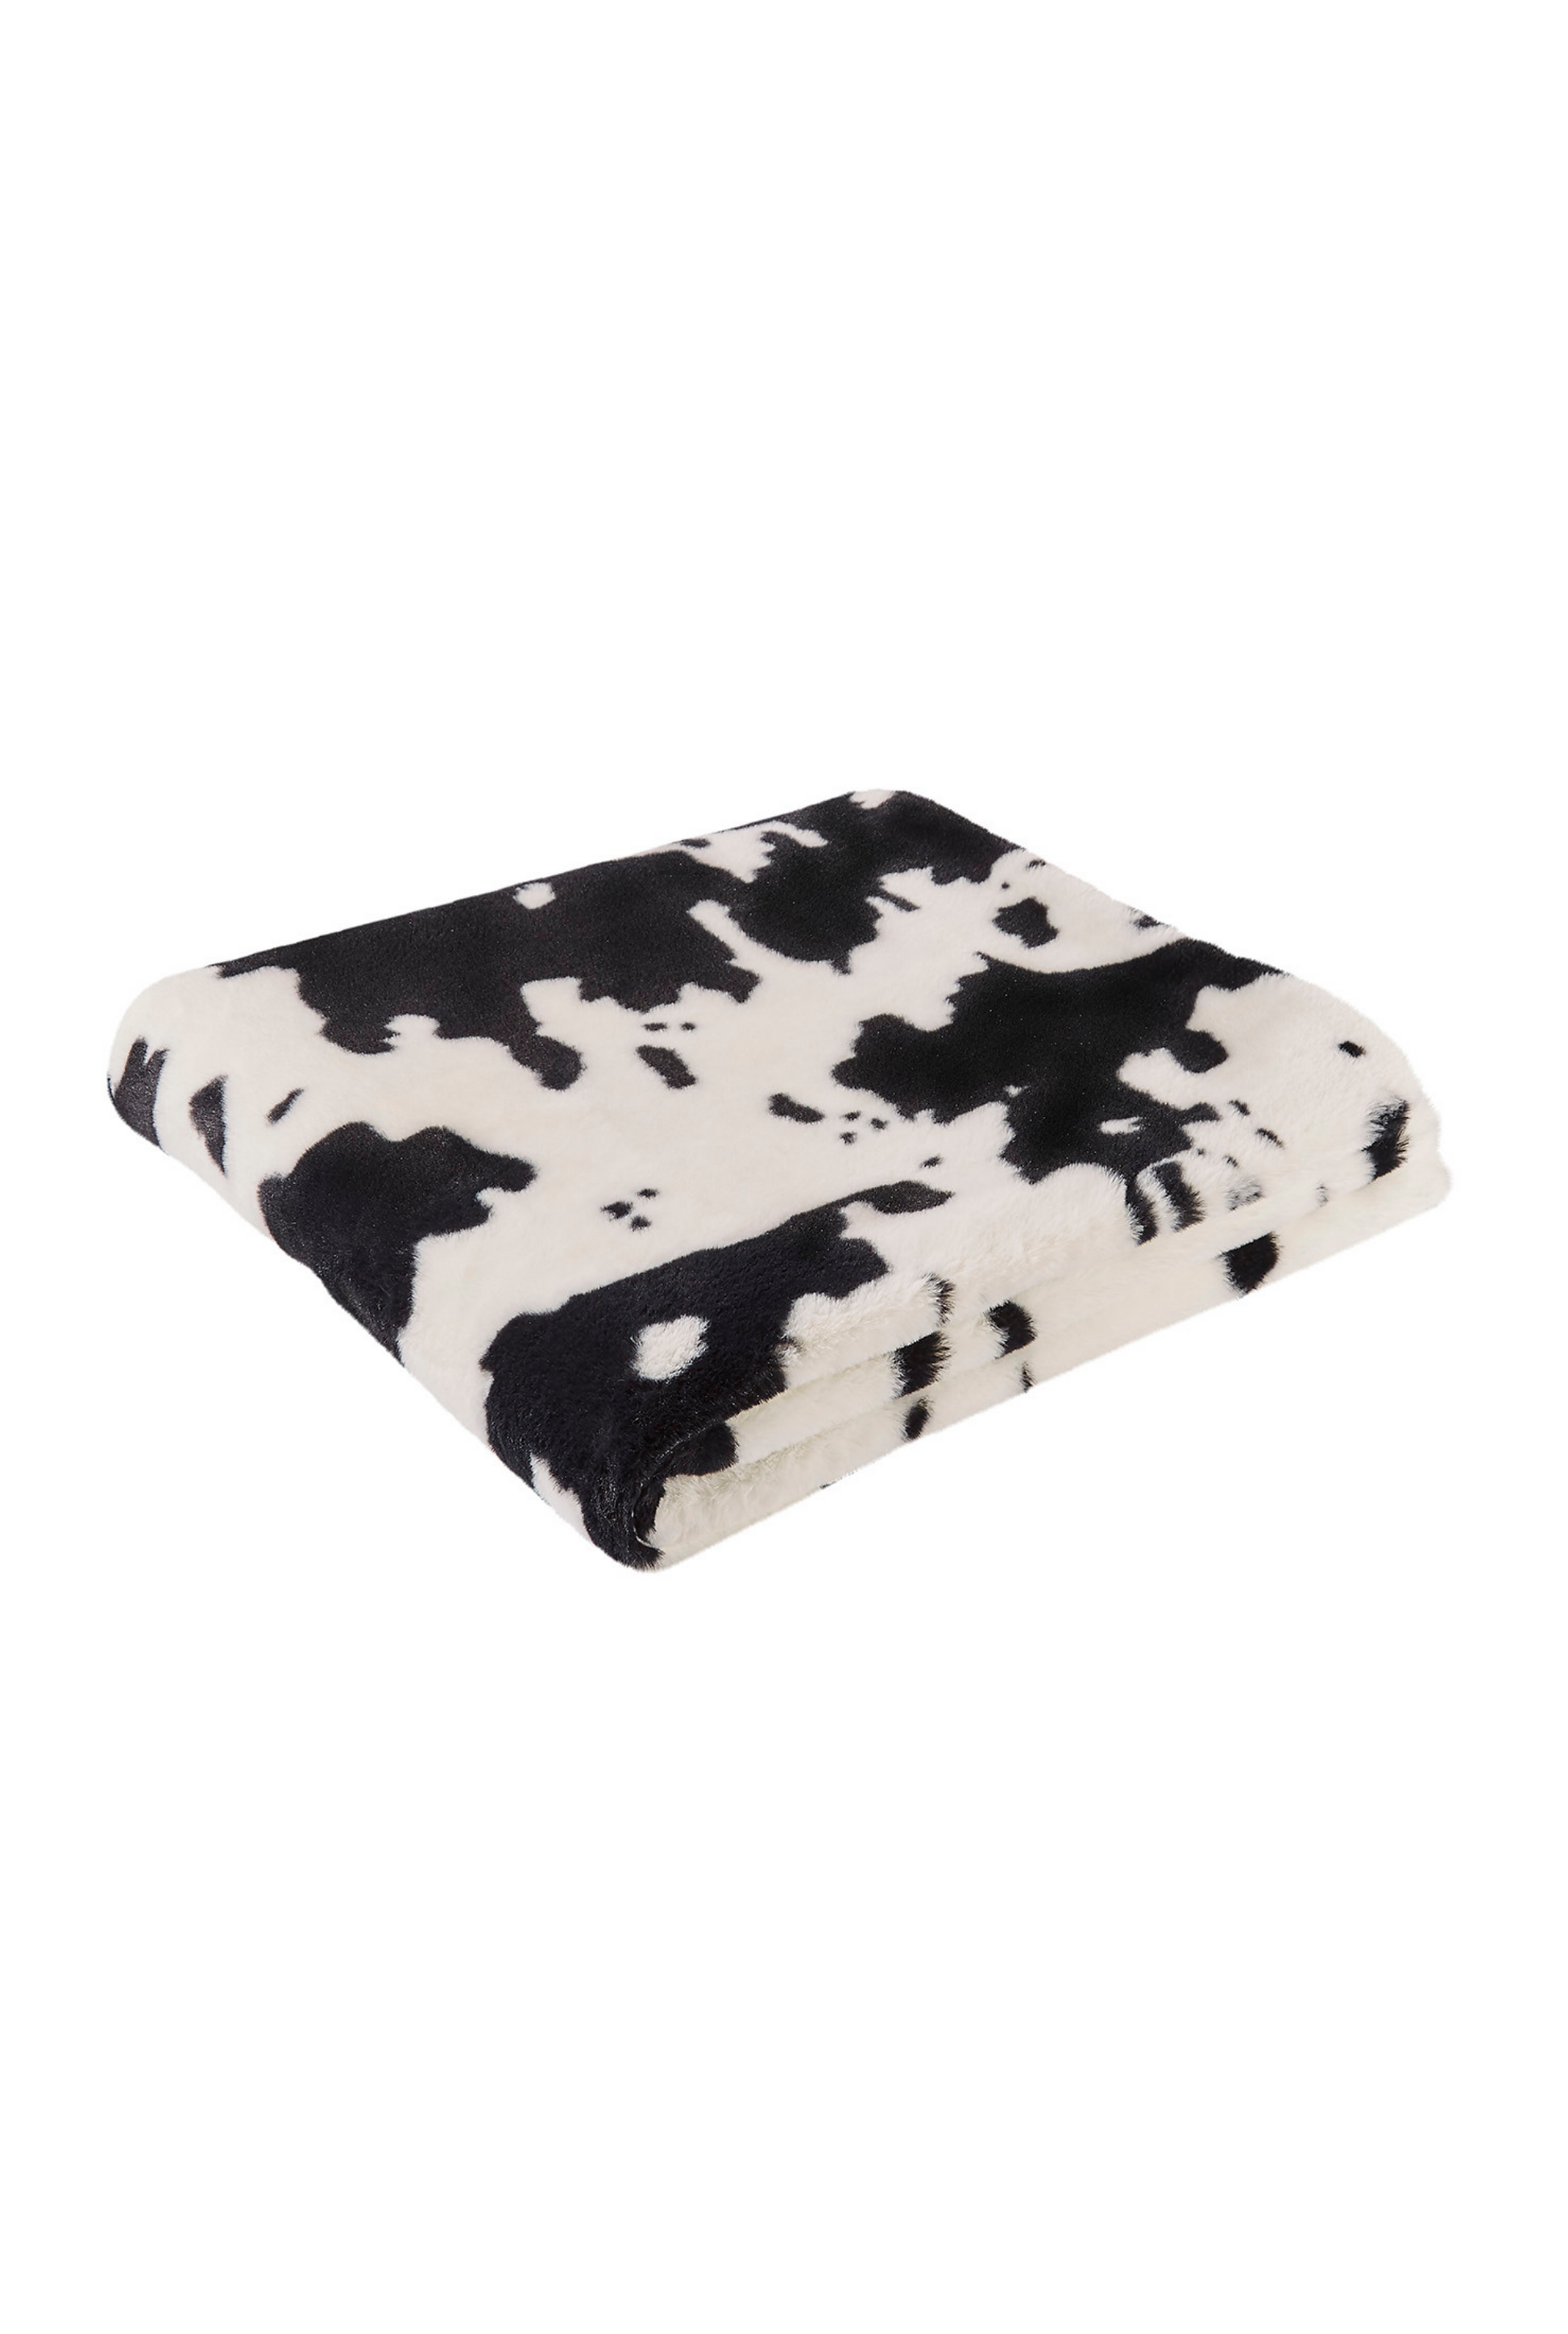 Faux fur throw blanket in black and white cow.